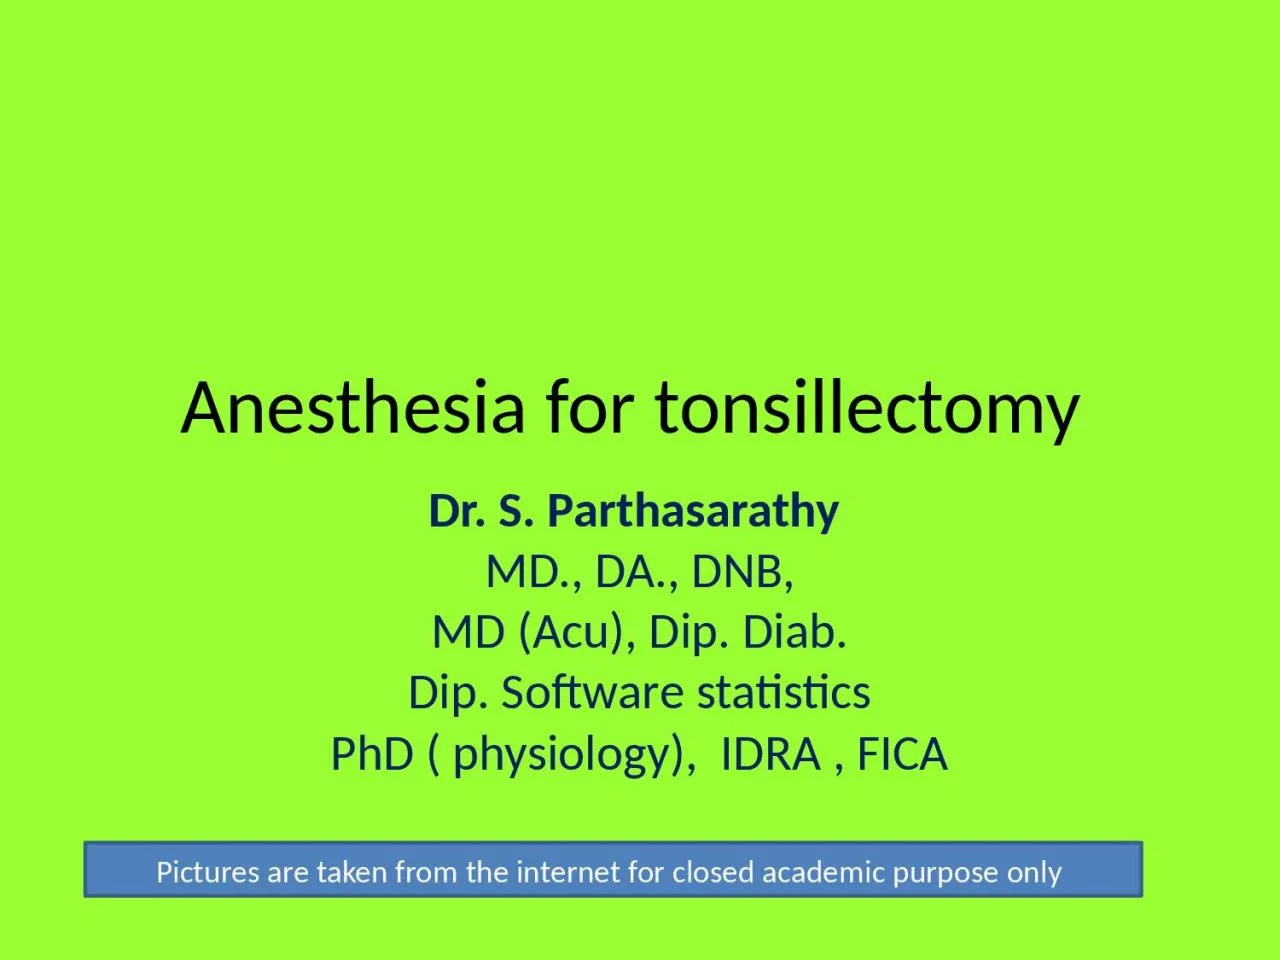 Anesthesia for tonsillectomy